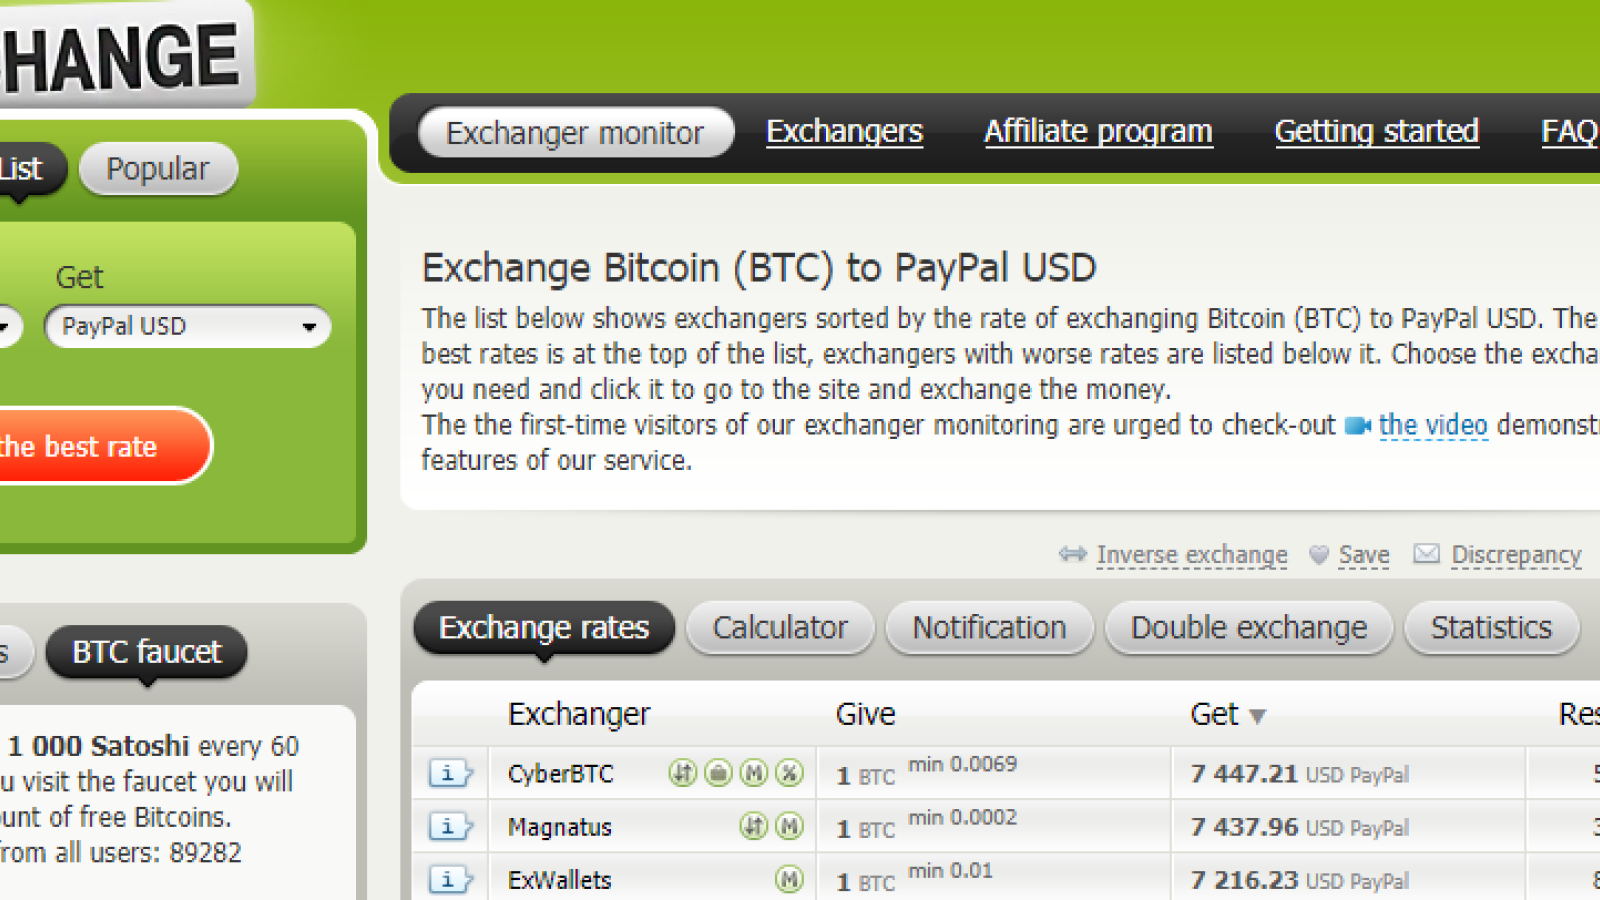 Top3 BTC to PayPal USD exchange offers of Bestchange